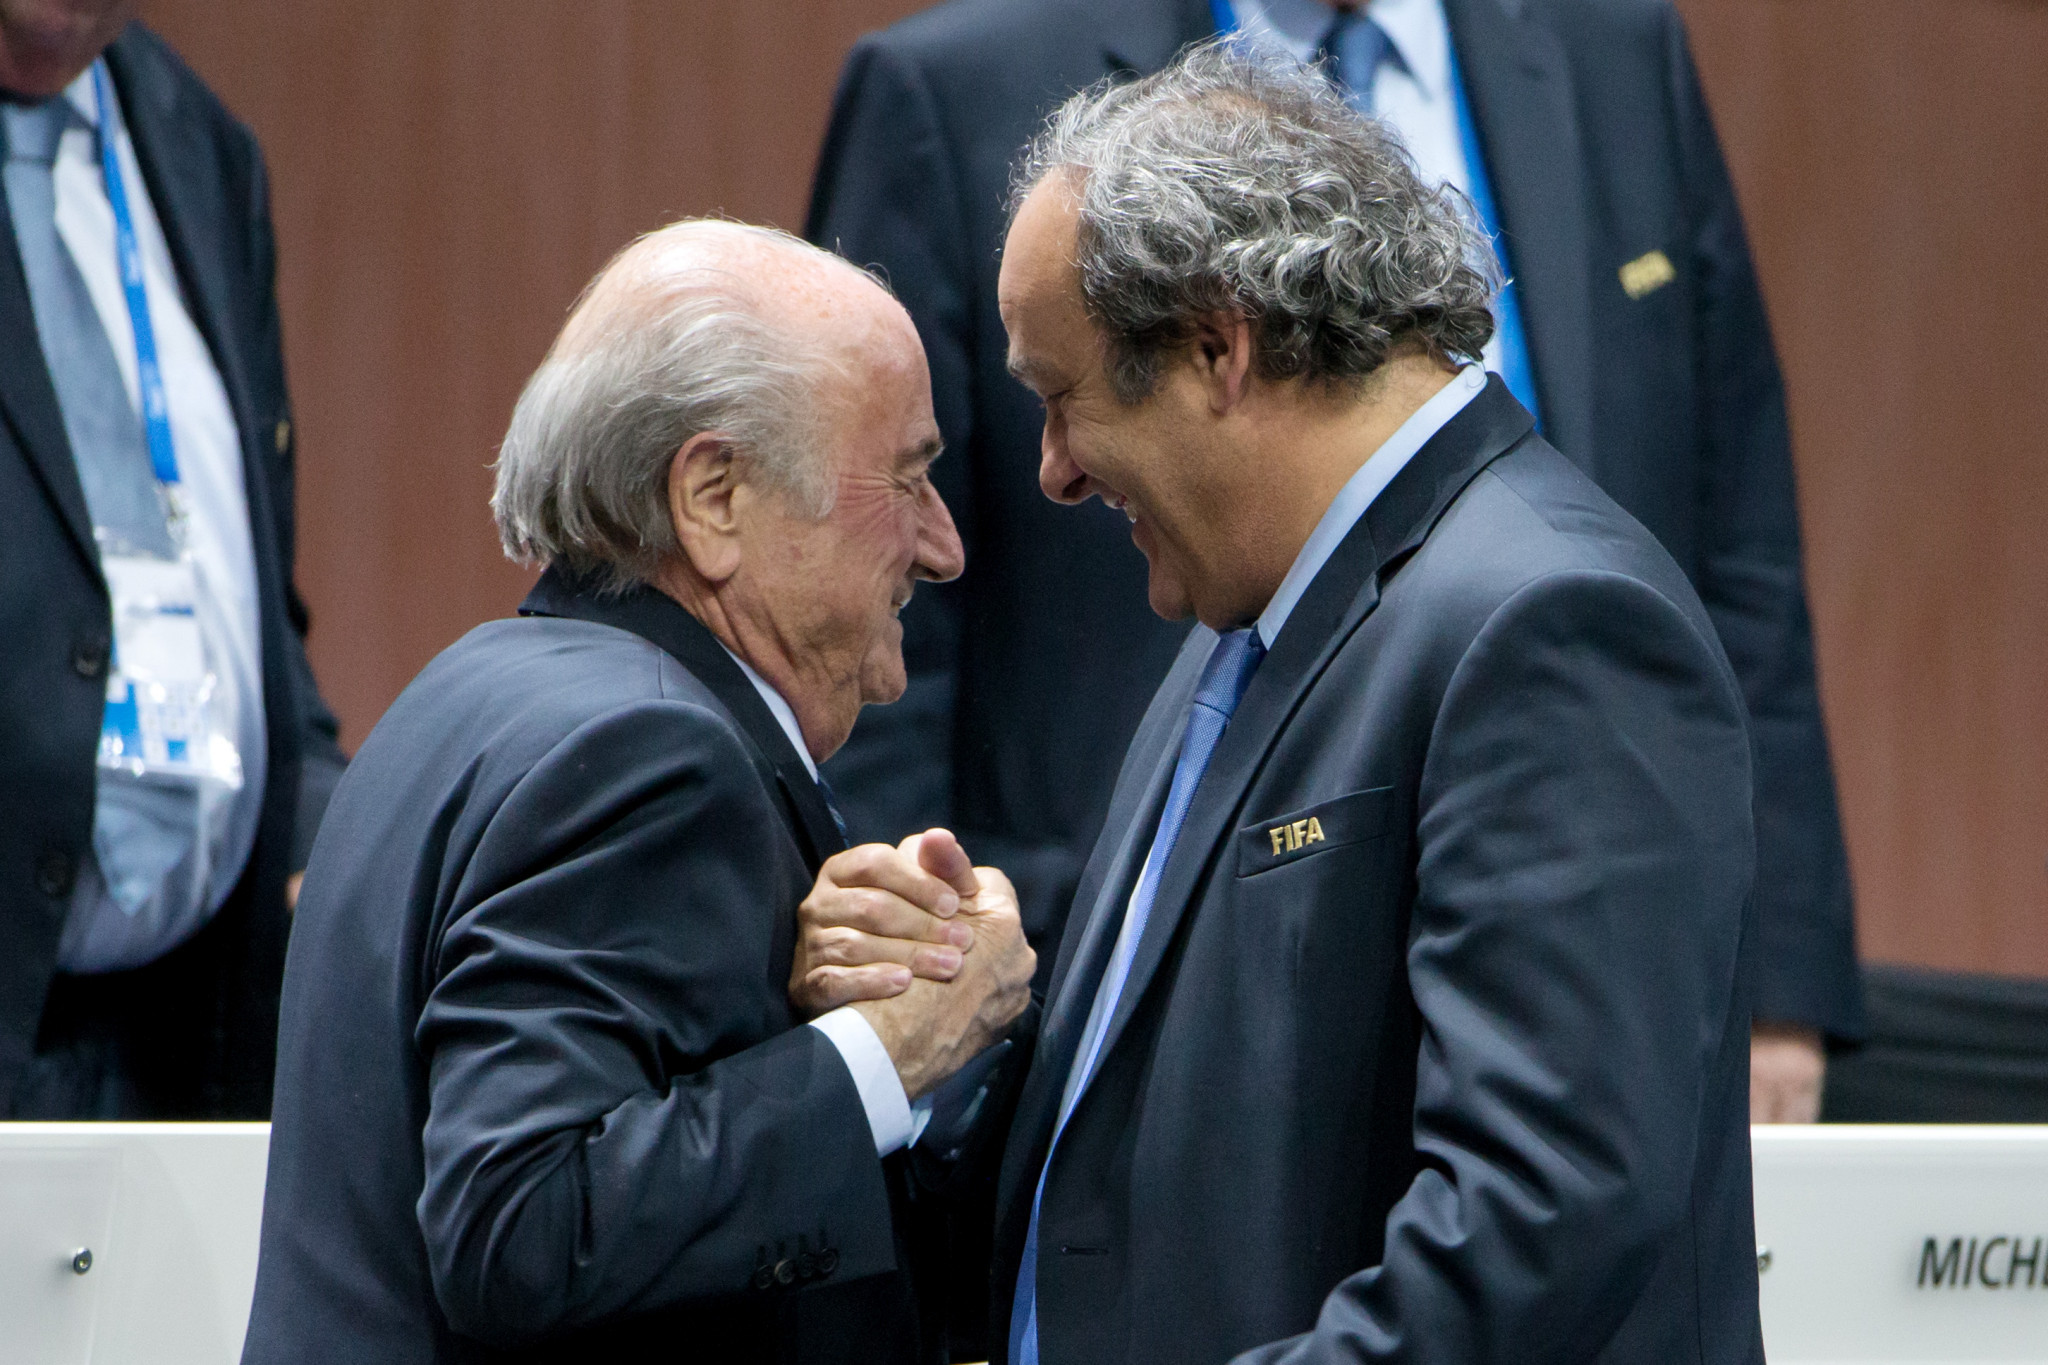 Sepp Blatter, left, and Michel Platini were banned from football in December 2015 ©Getty Images